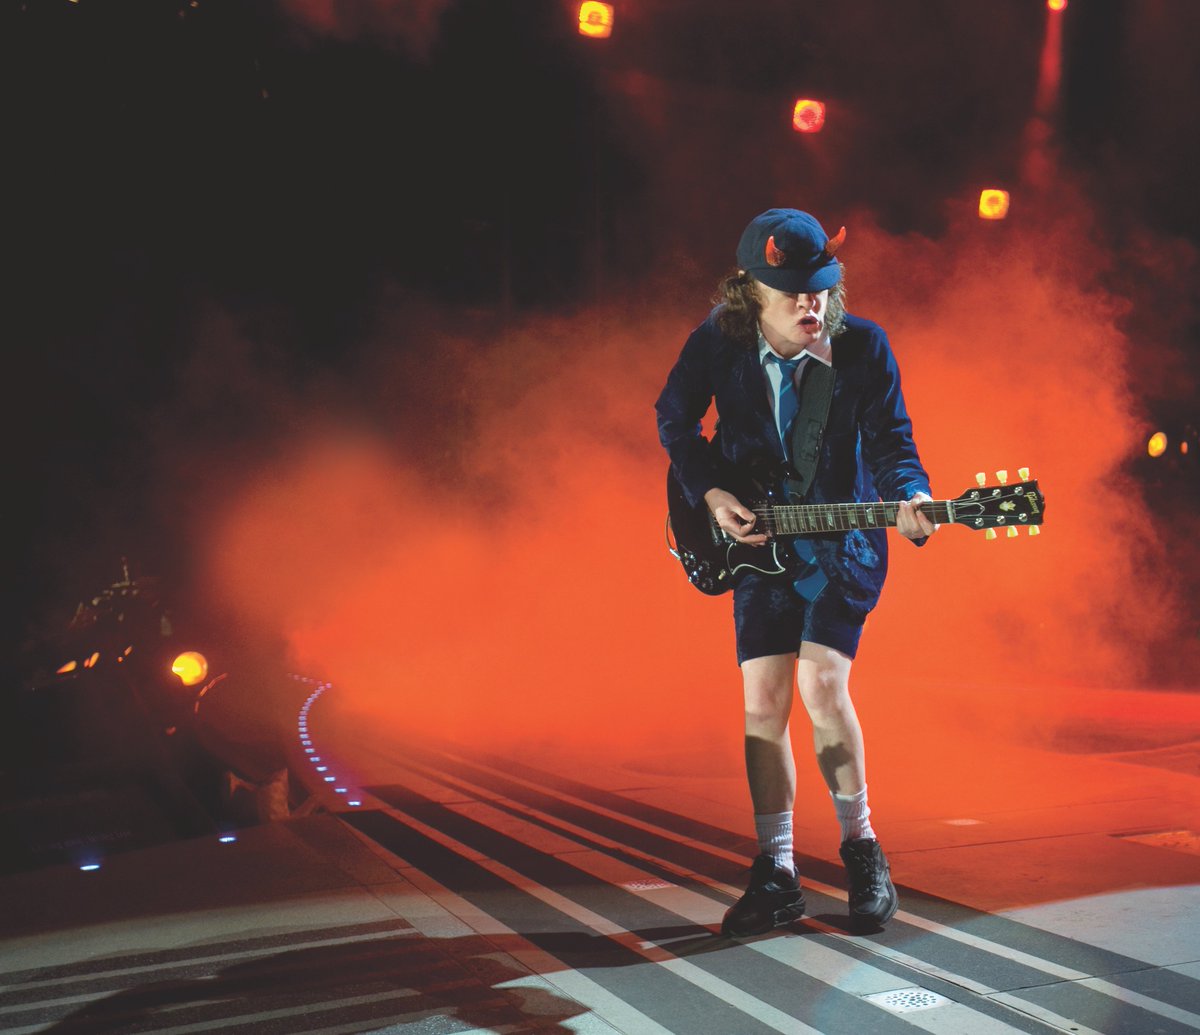 Our very own #AngusYoung turns 61 today! Wish Mr. Young a rockin' birthday using  #AngusYoung61